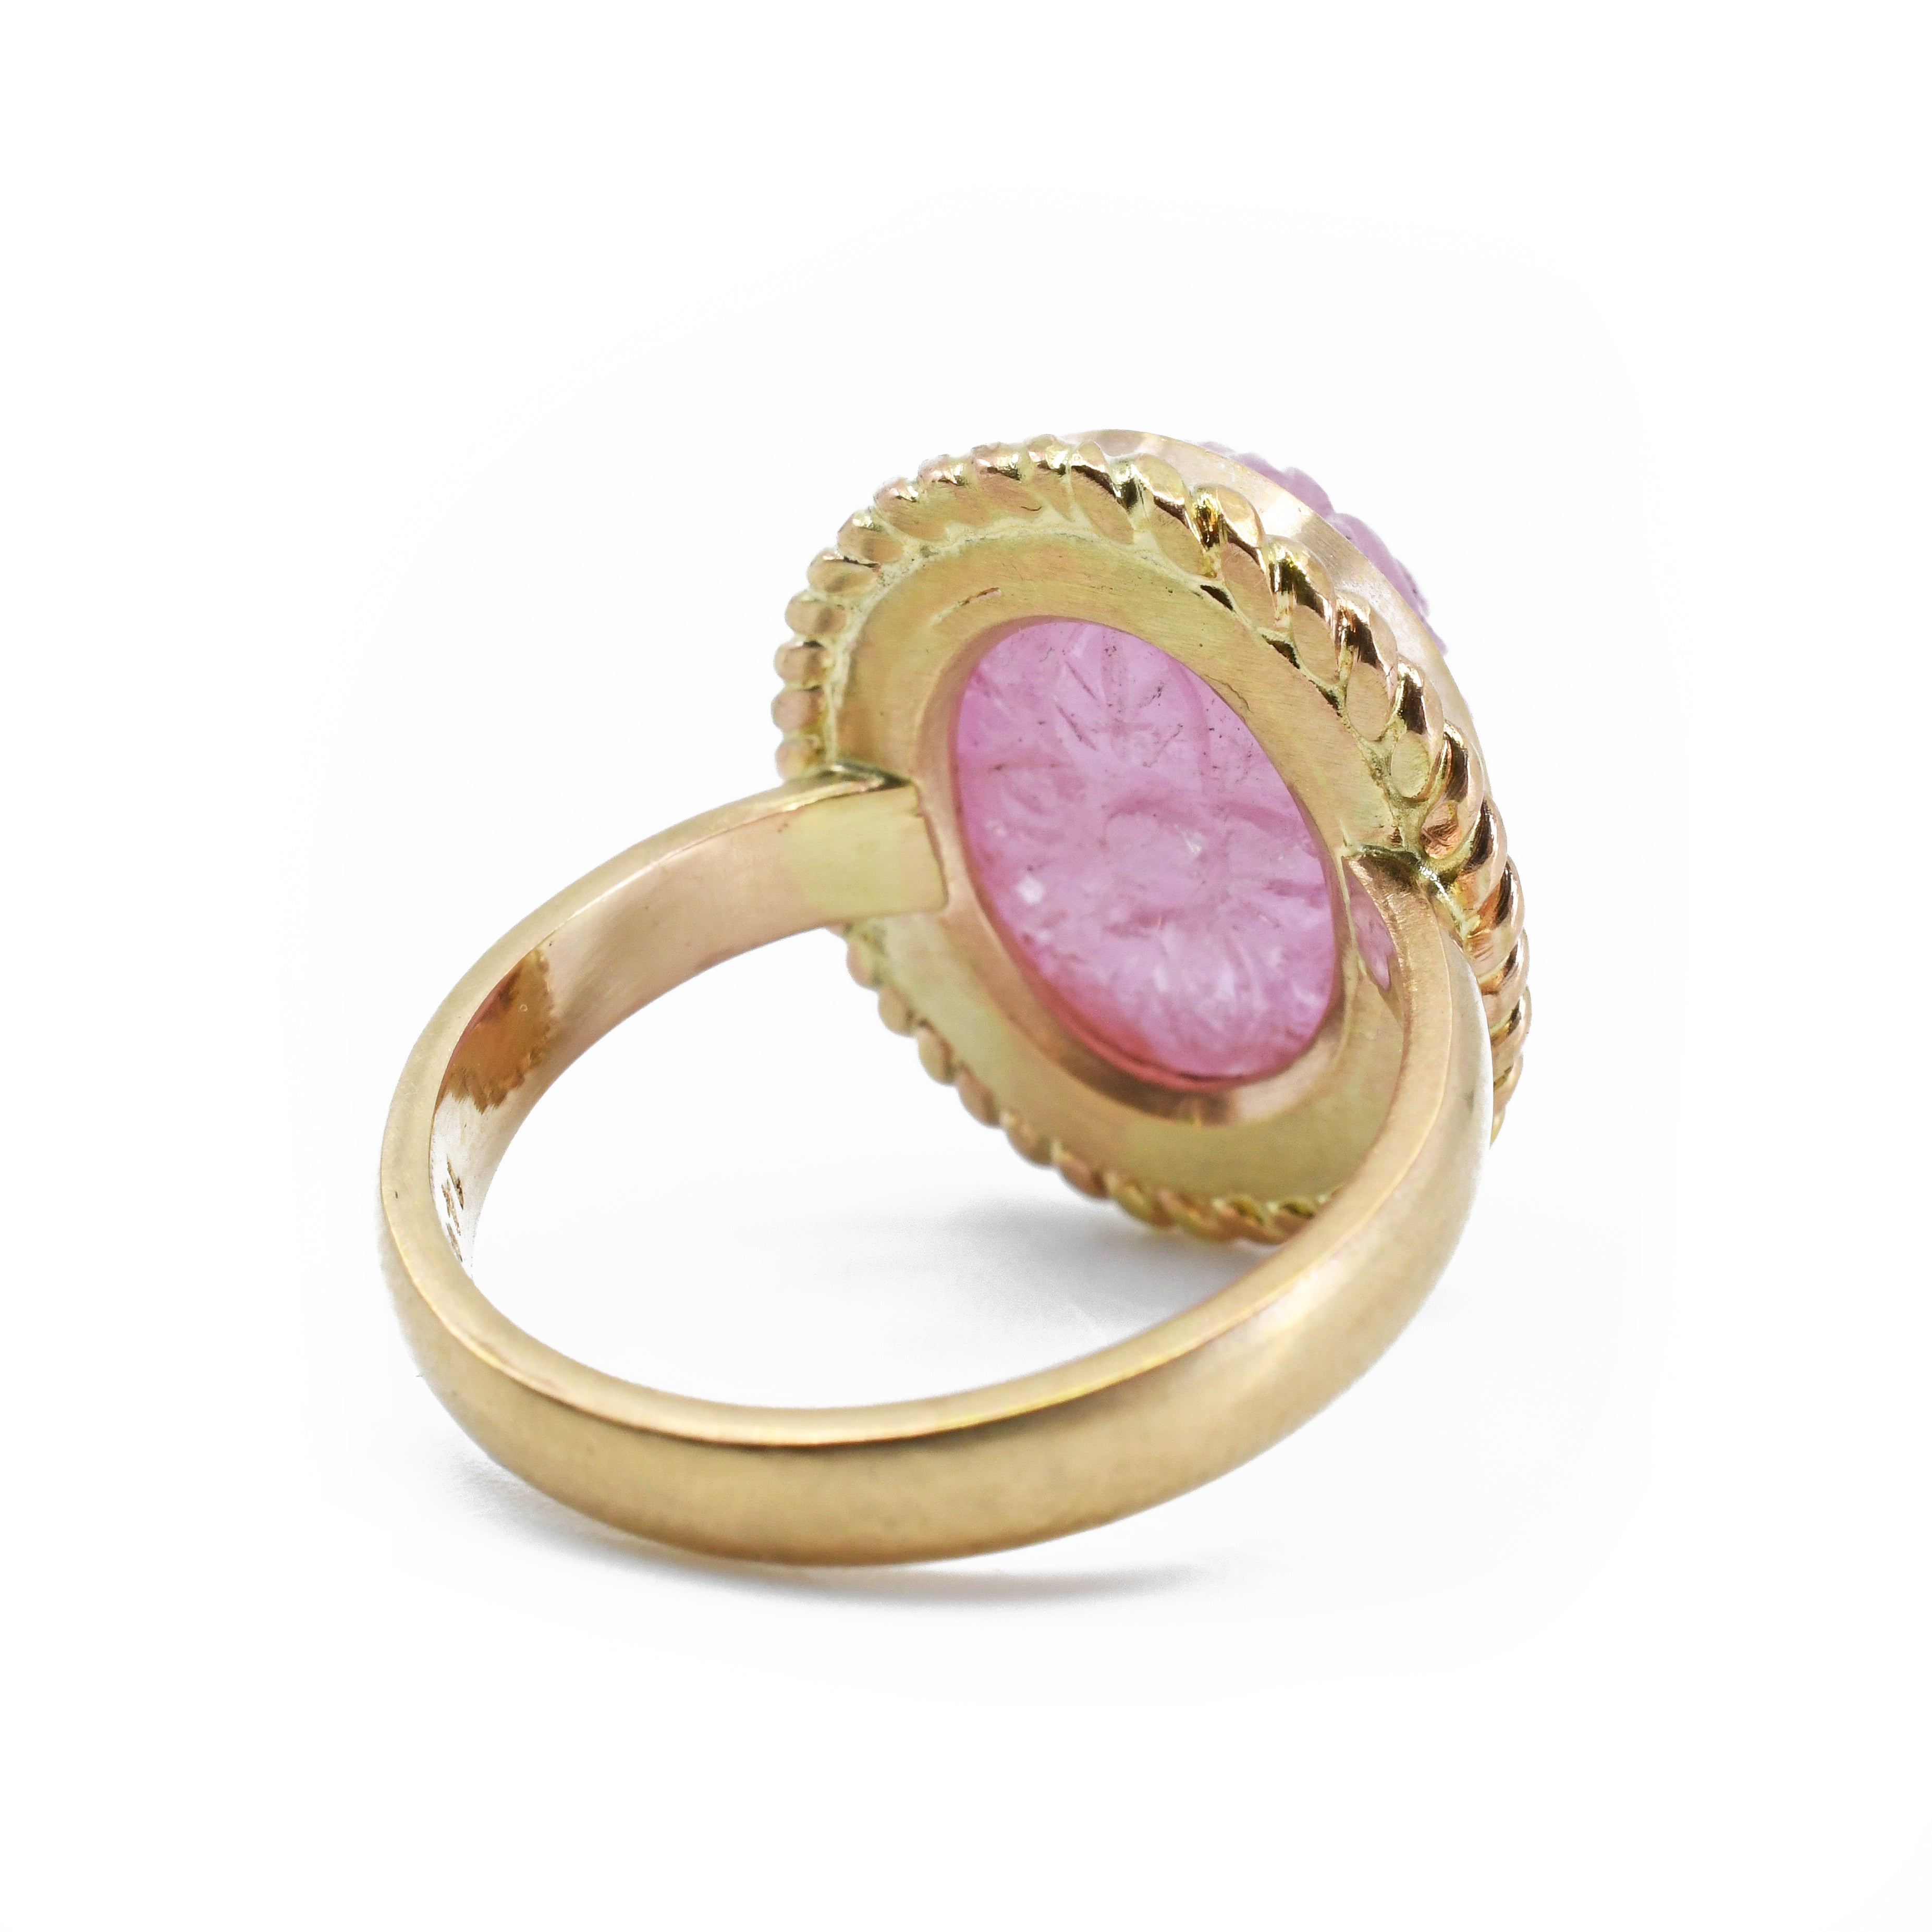 Pink Tourmaline 13.81 mm 10.4 carats Floral Carved 14K Handcrafted Ring - GGO-173 - Crystalarium